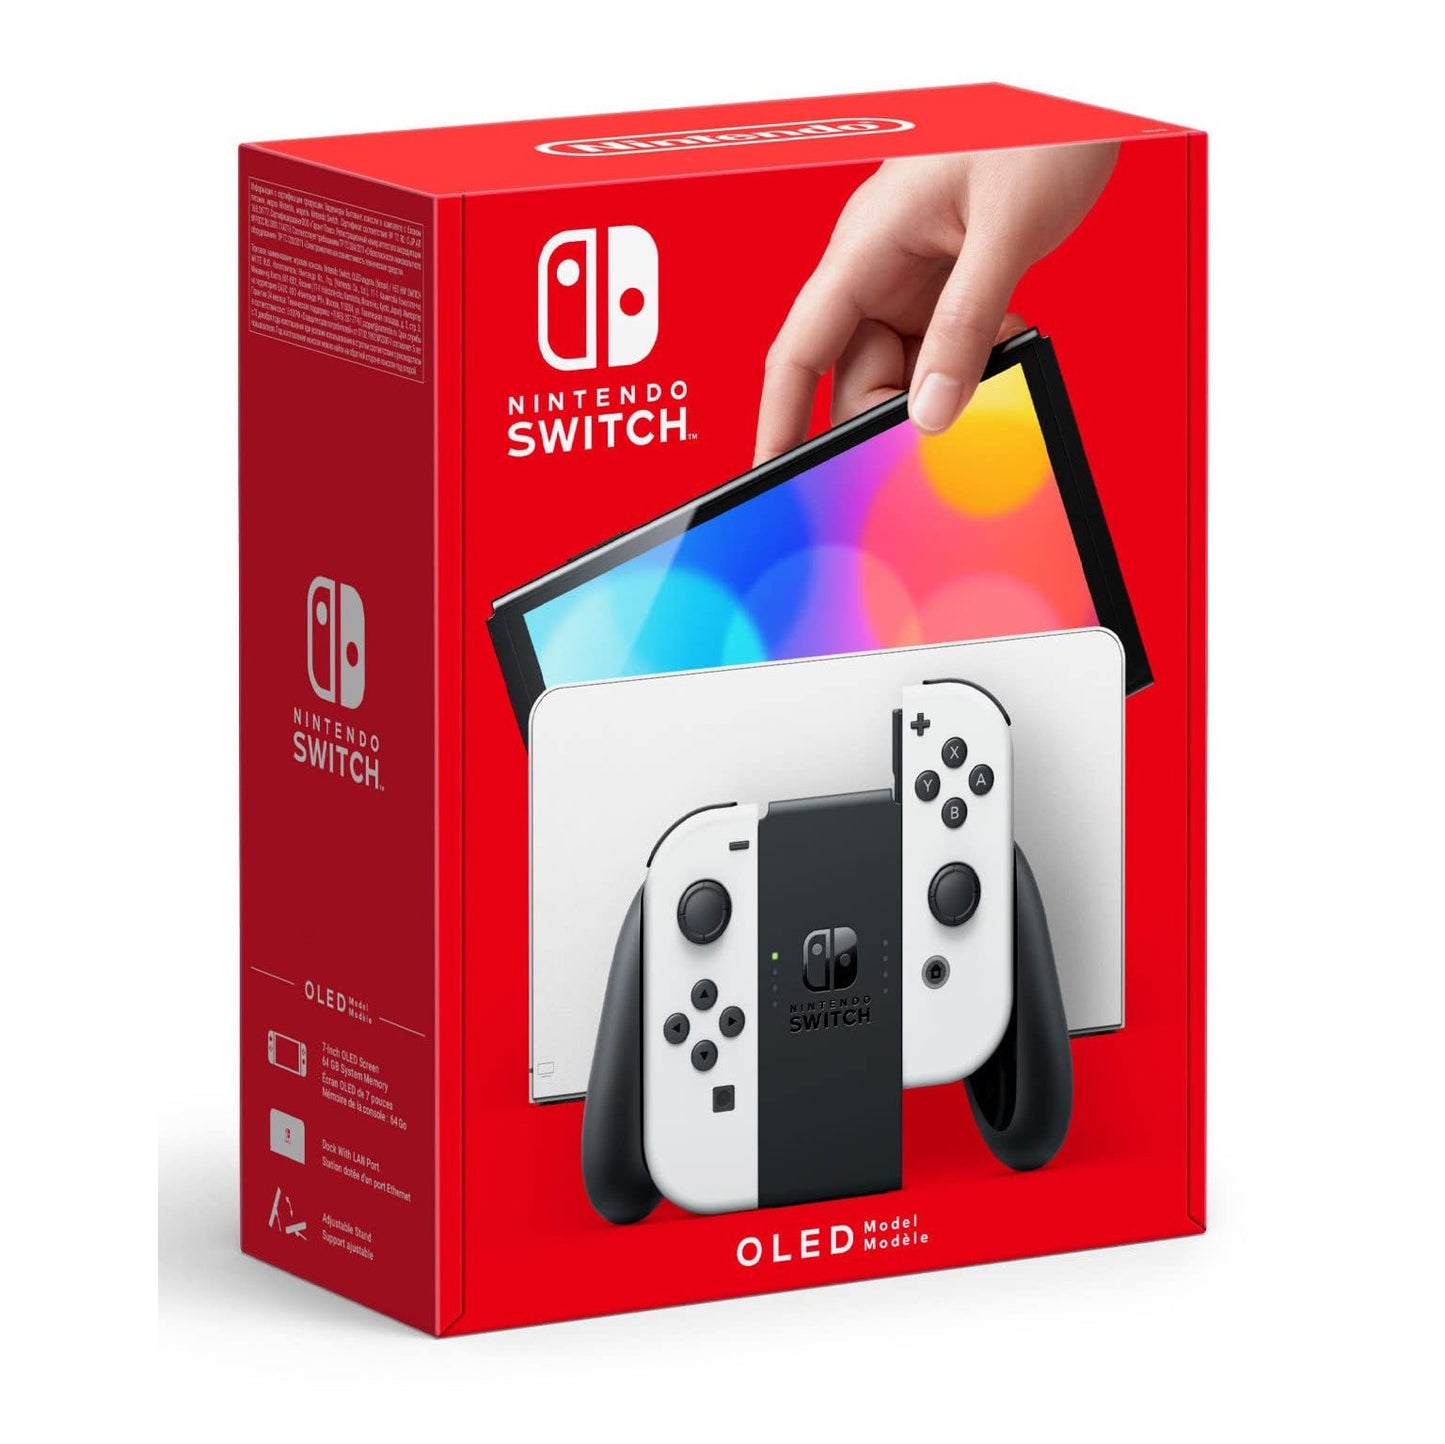 Nintendo Switch OLED - 64GB Console (with White Joy-Cons) - Nyson Retail